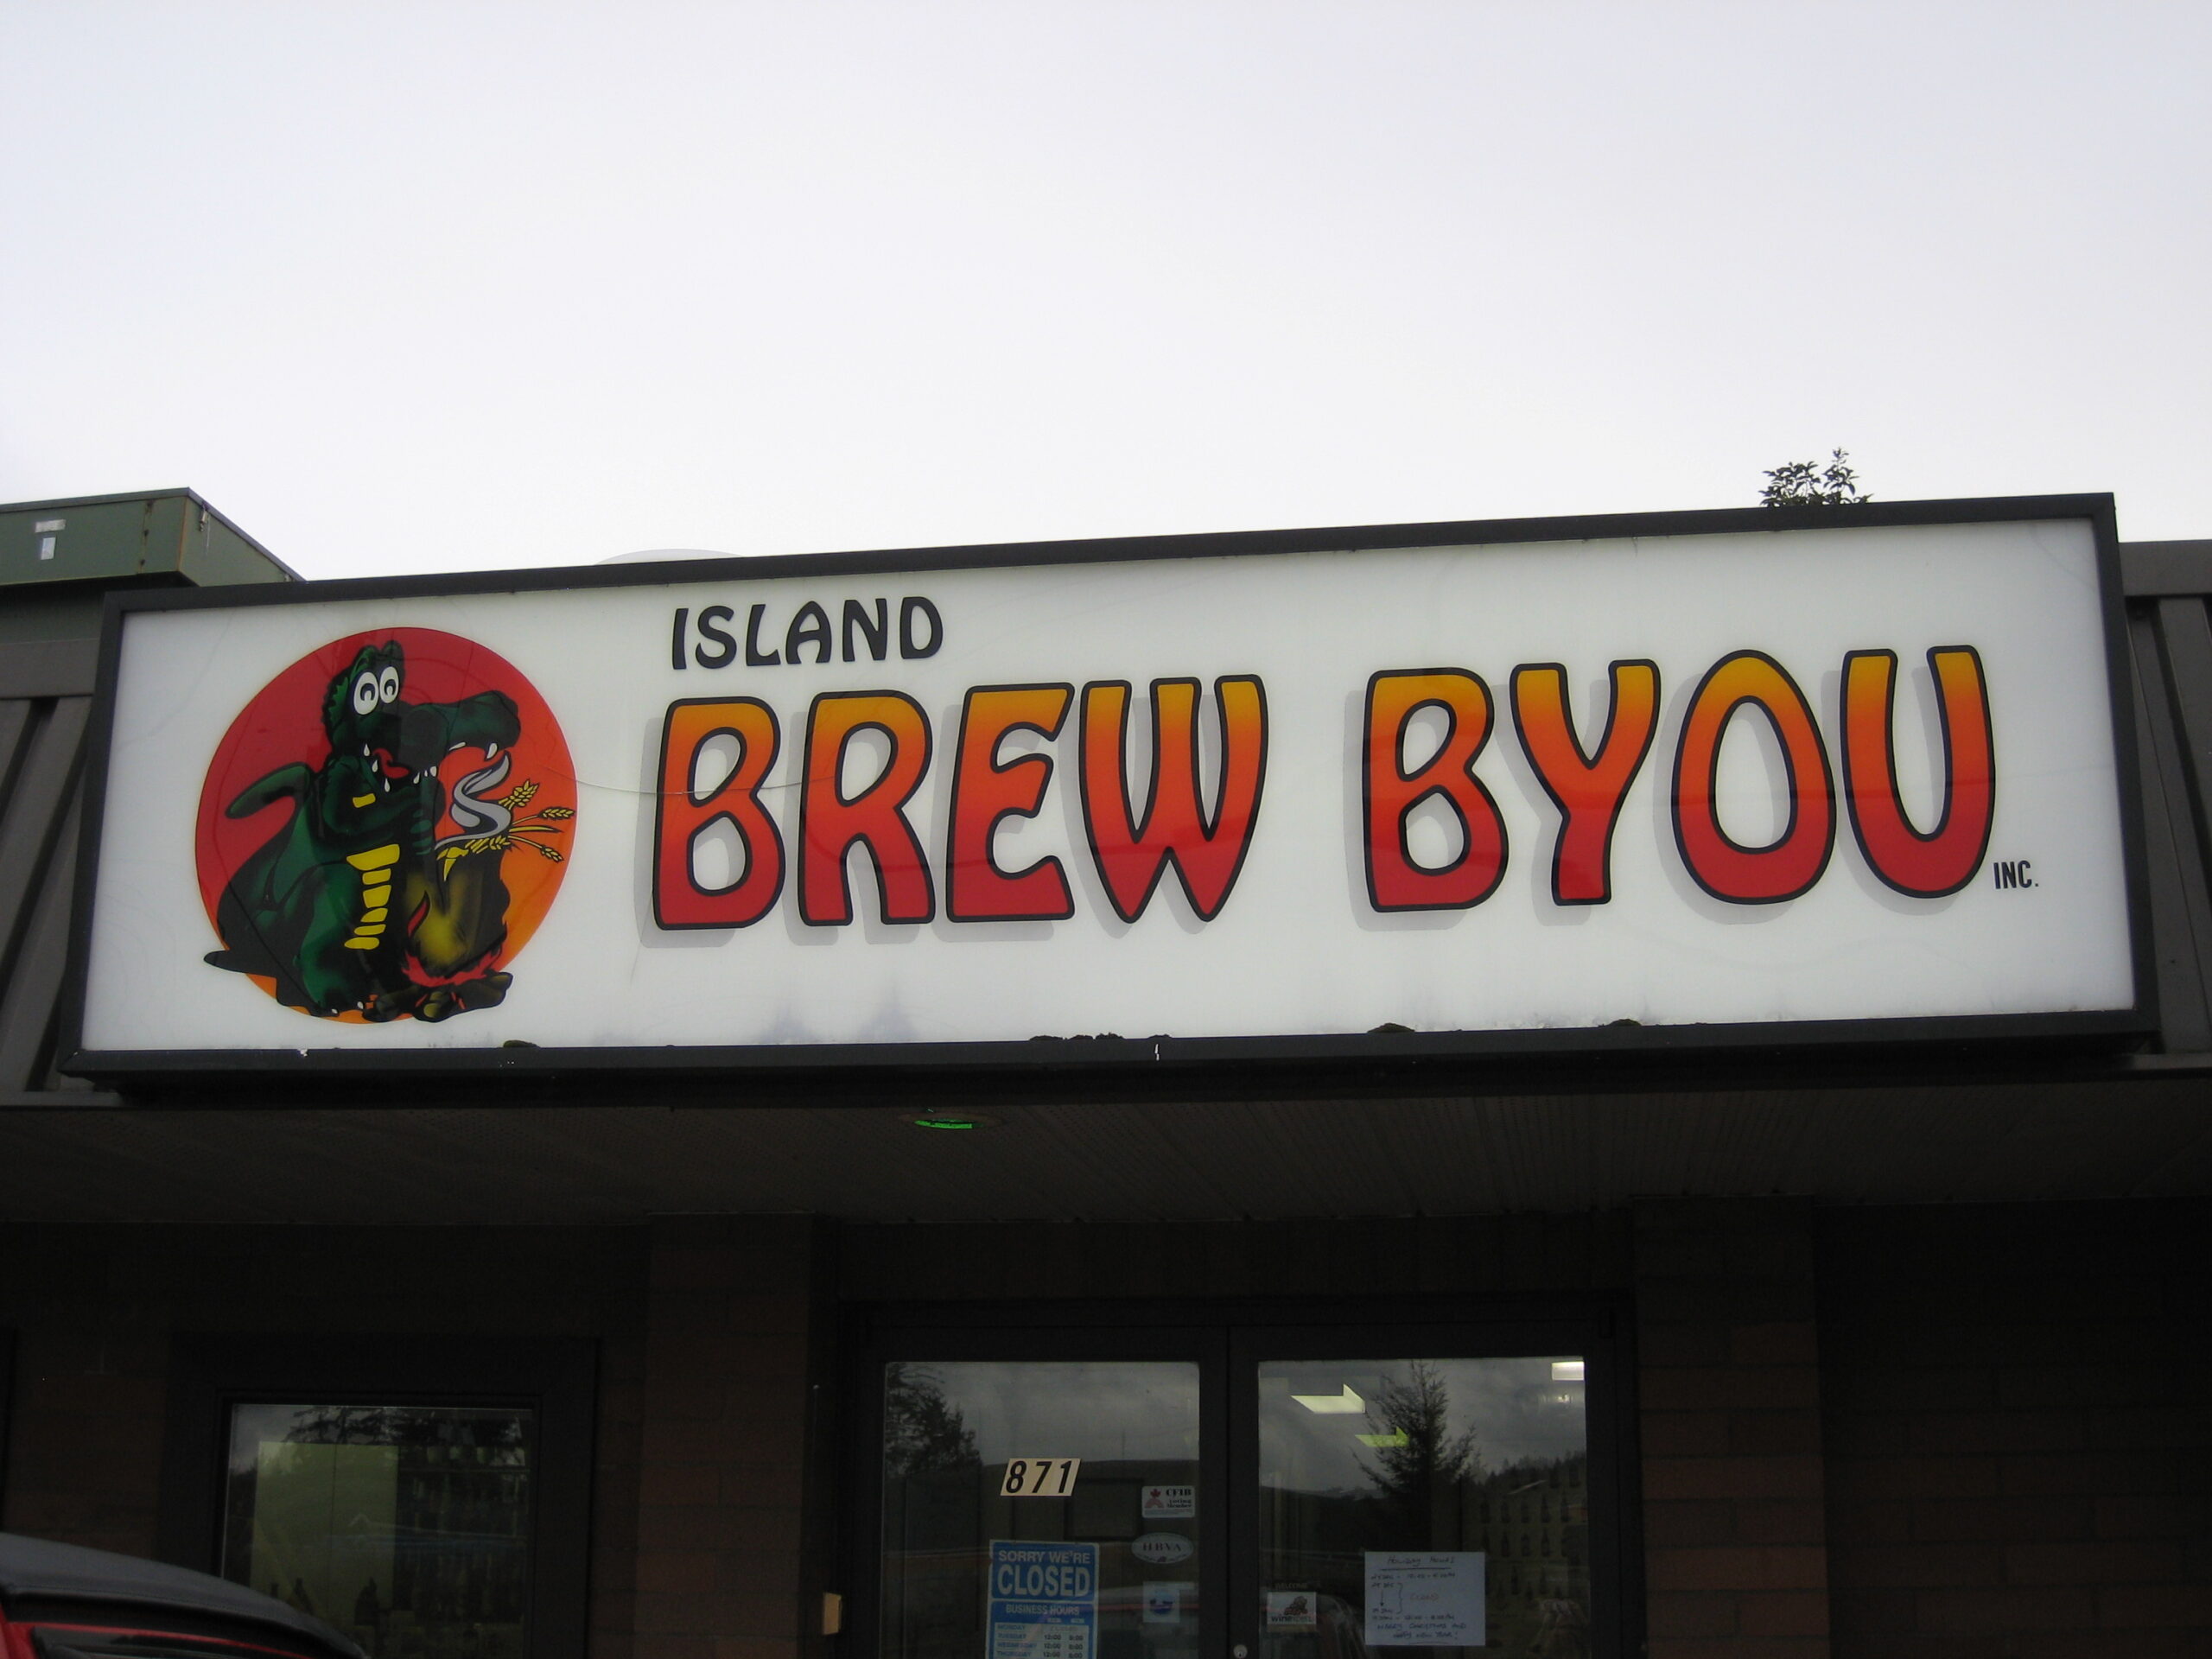 Outside pic of Island Brew byou